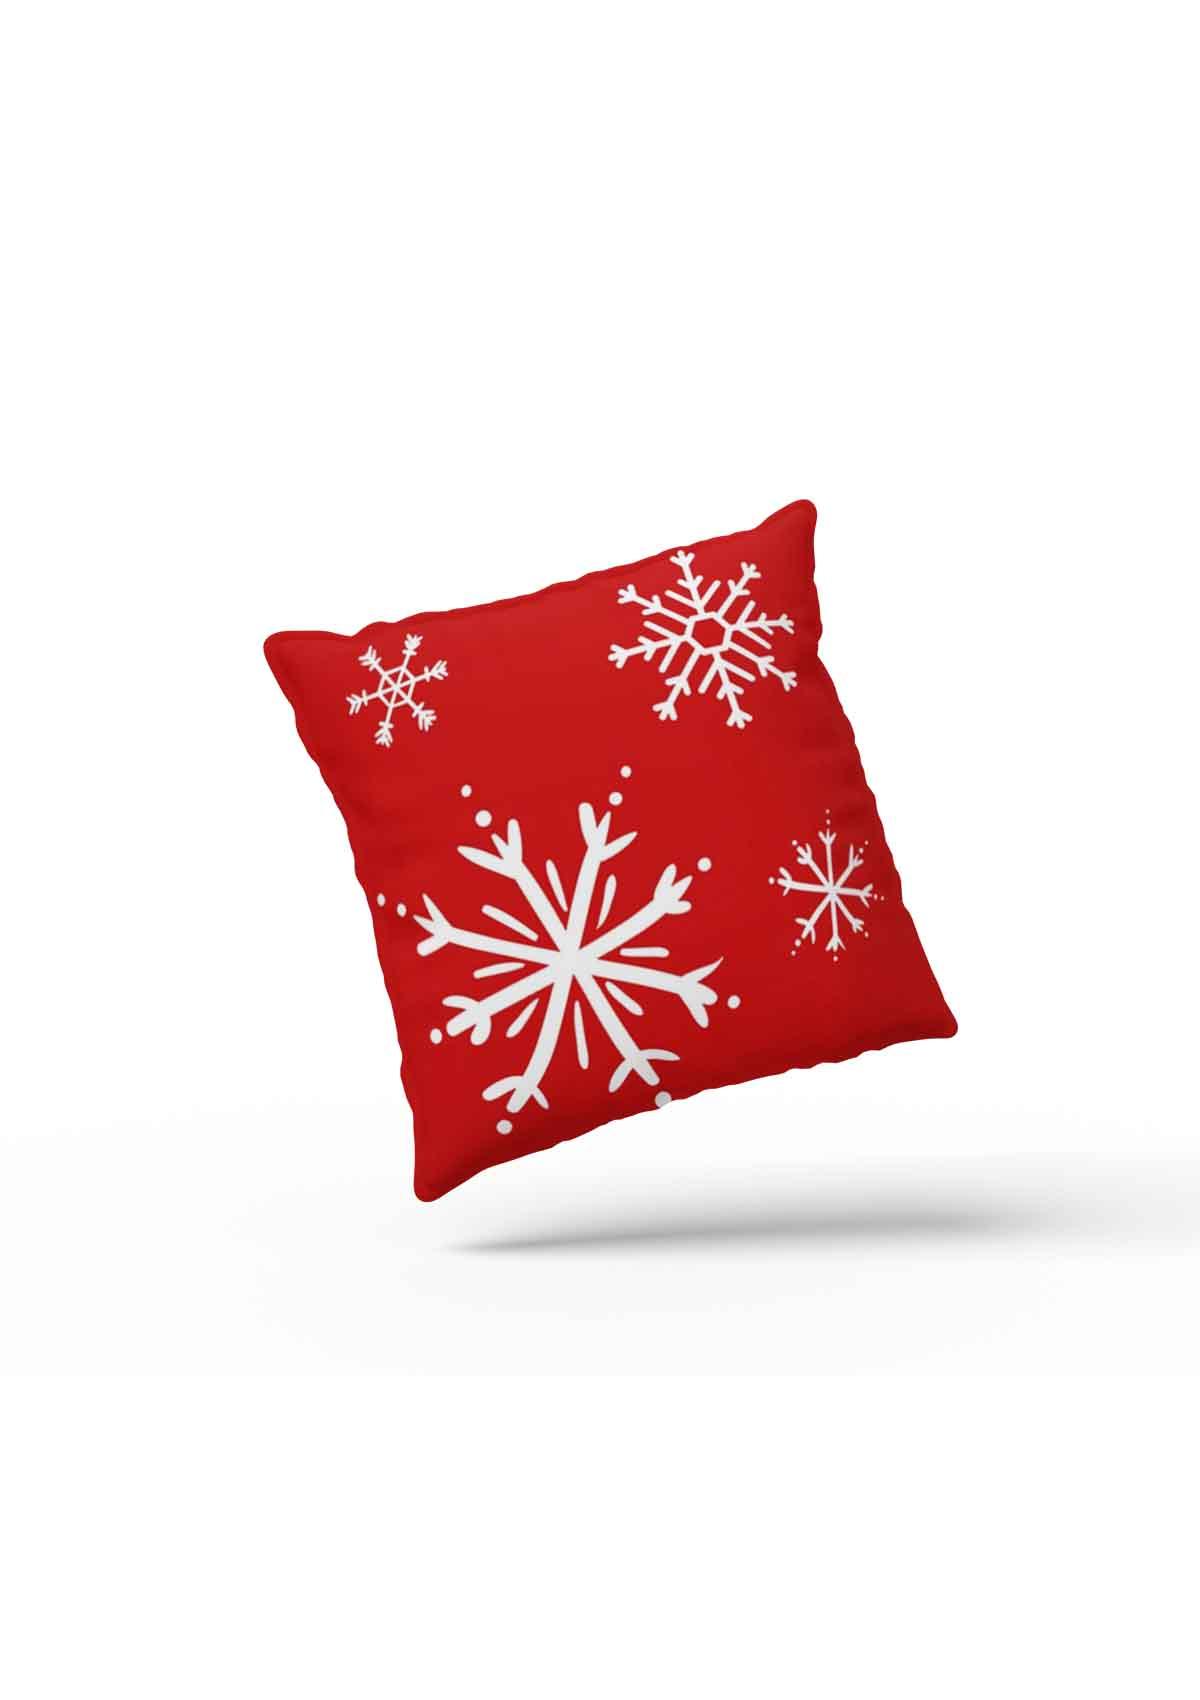 Snowflake "MerryChristmas" Cushion Cover